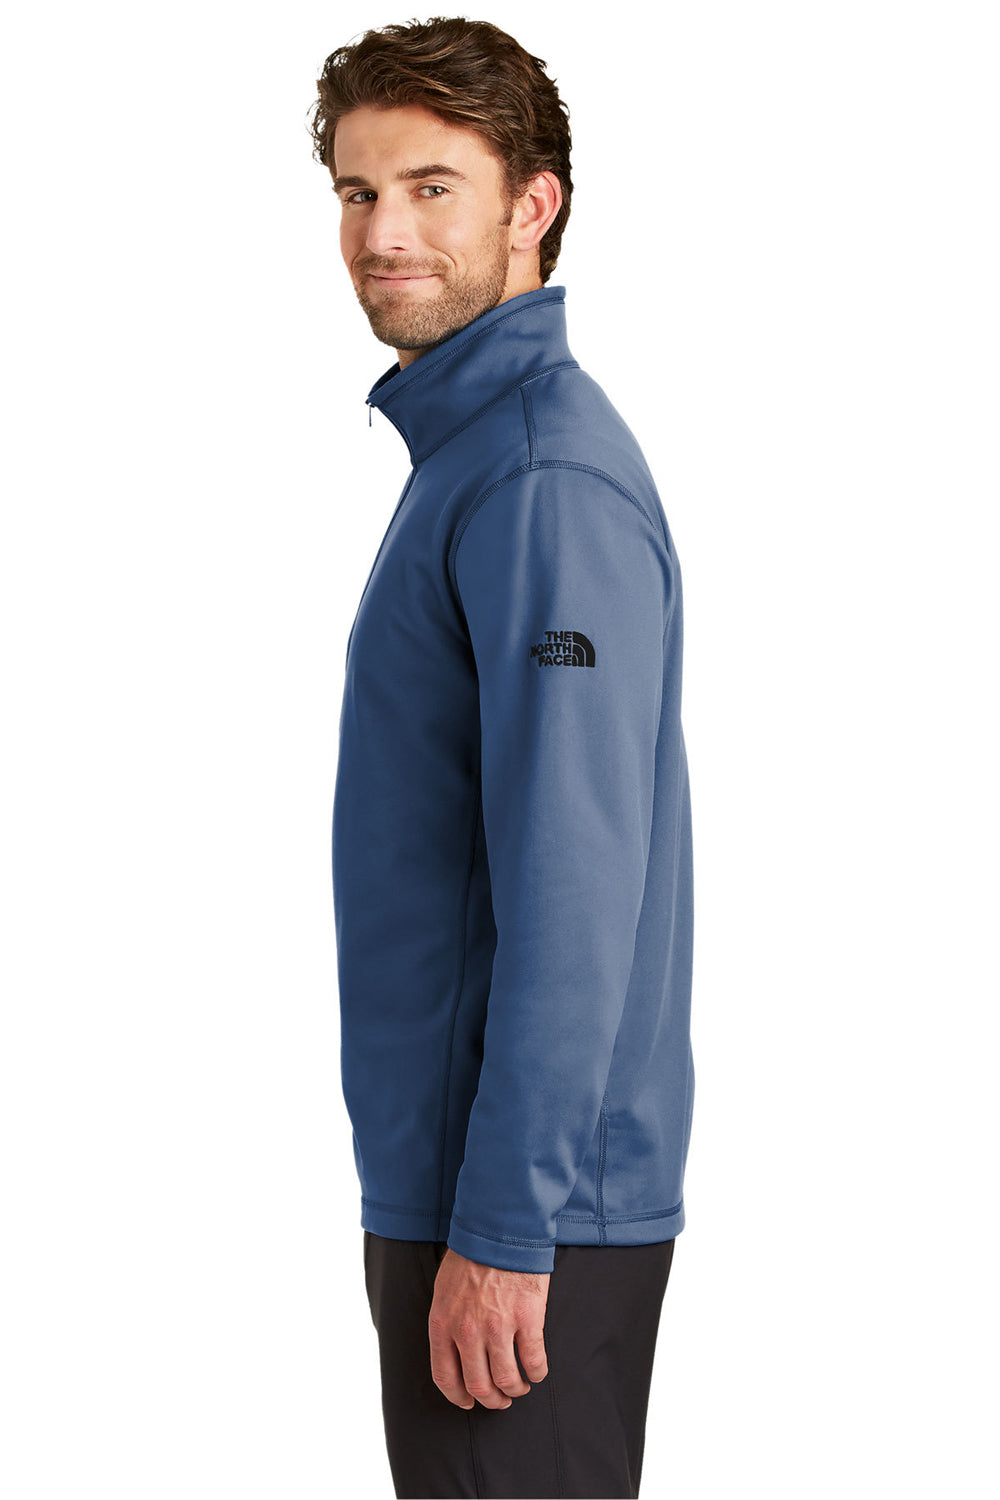 The North Face NF0A3LHB Mens Tech 1/4 Zip Fleece Jacket Blue Wing Side